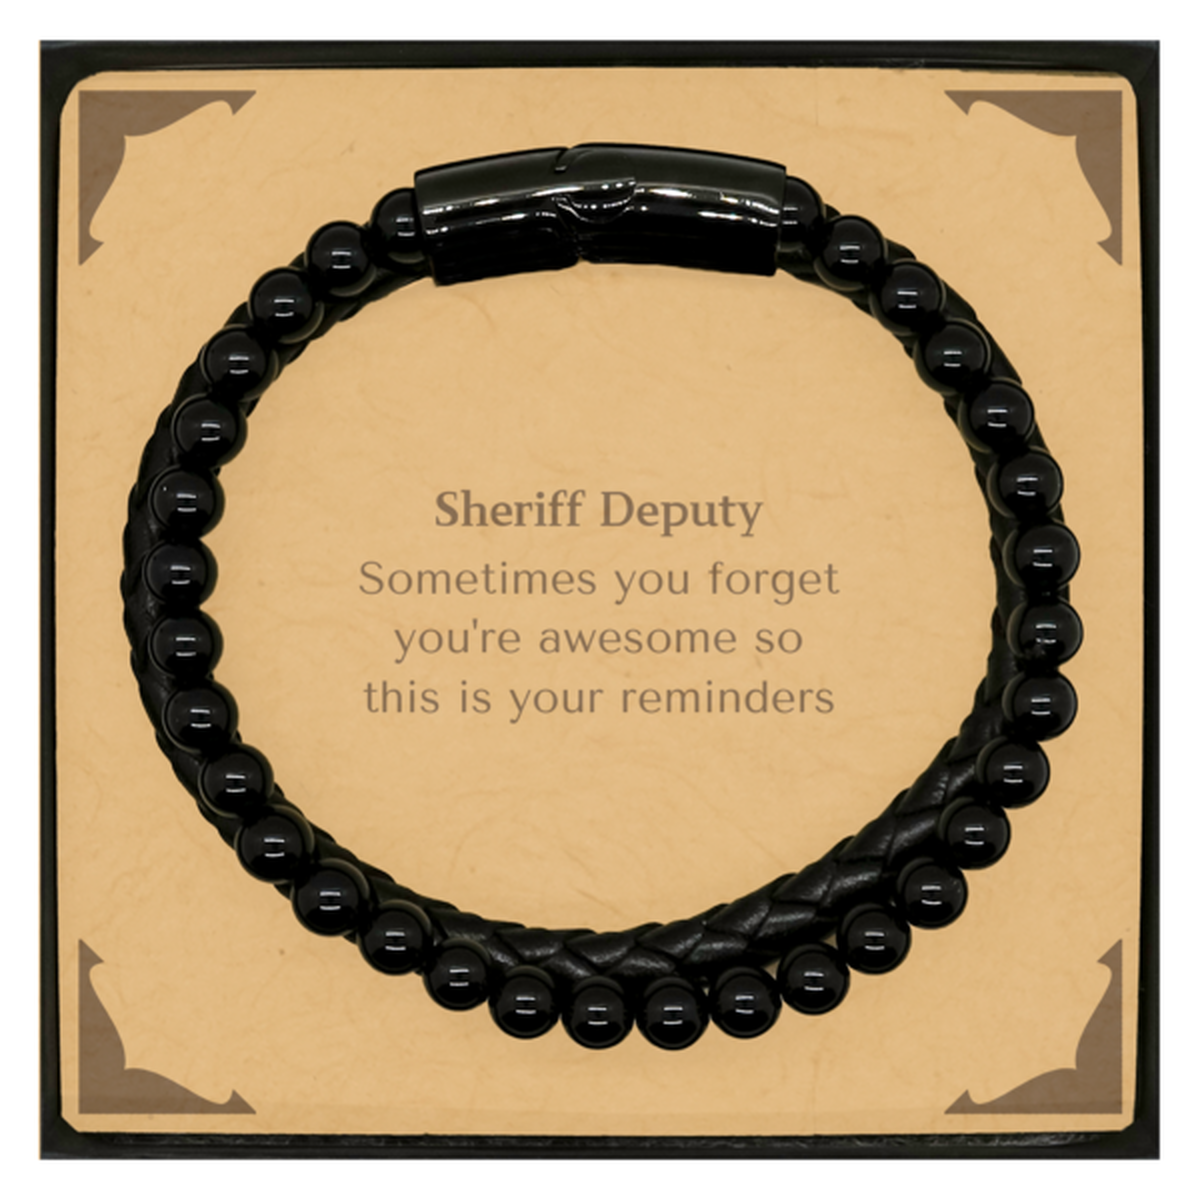 Sentimental Sheriff Deputy Stone Leather Bracelets, Sheriff Deputy Sometimes you forget you're awesome so this is your reminders, Graduation Christmas Birthday Gifts for Sheriff Deputy, Men, Women, Coworkers